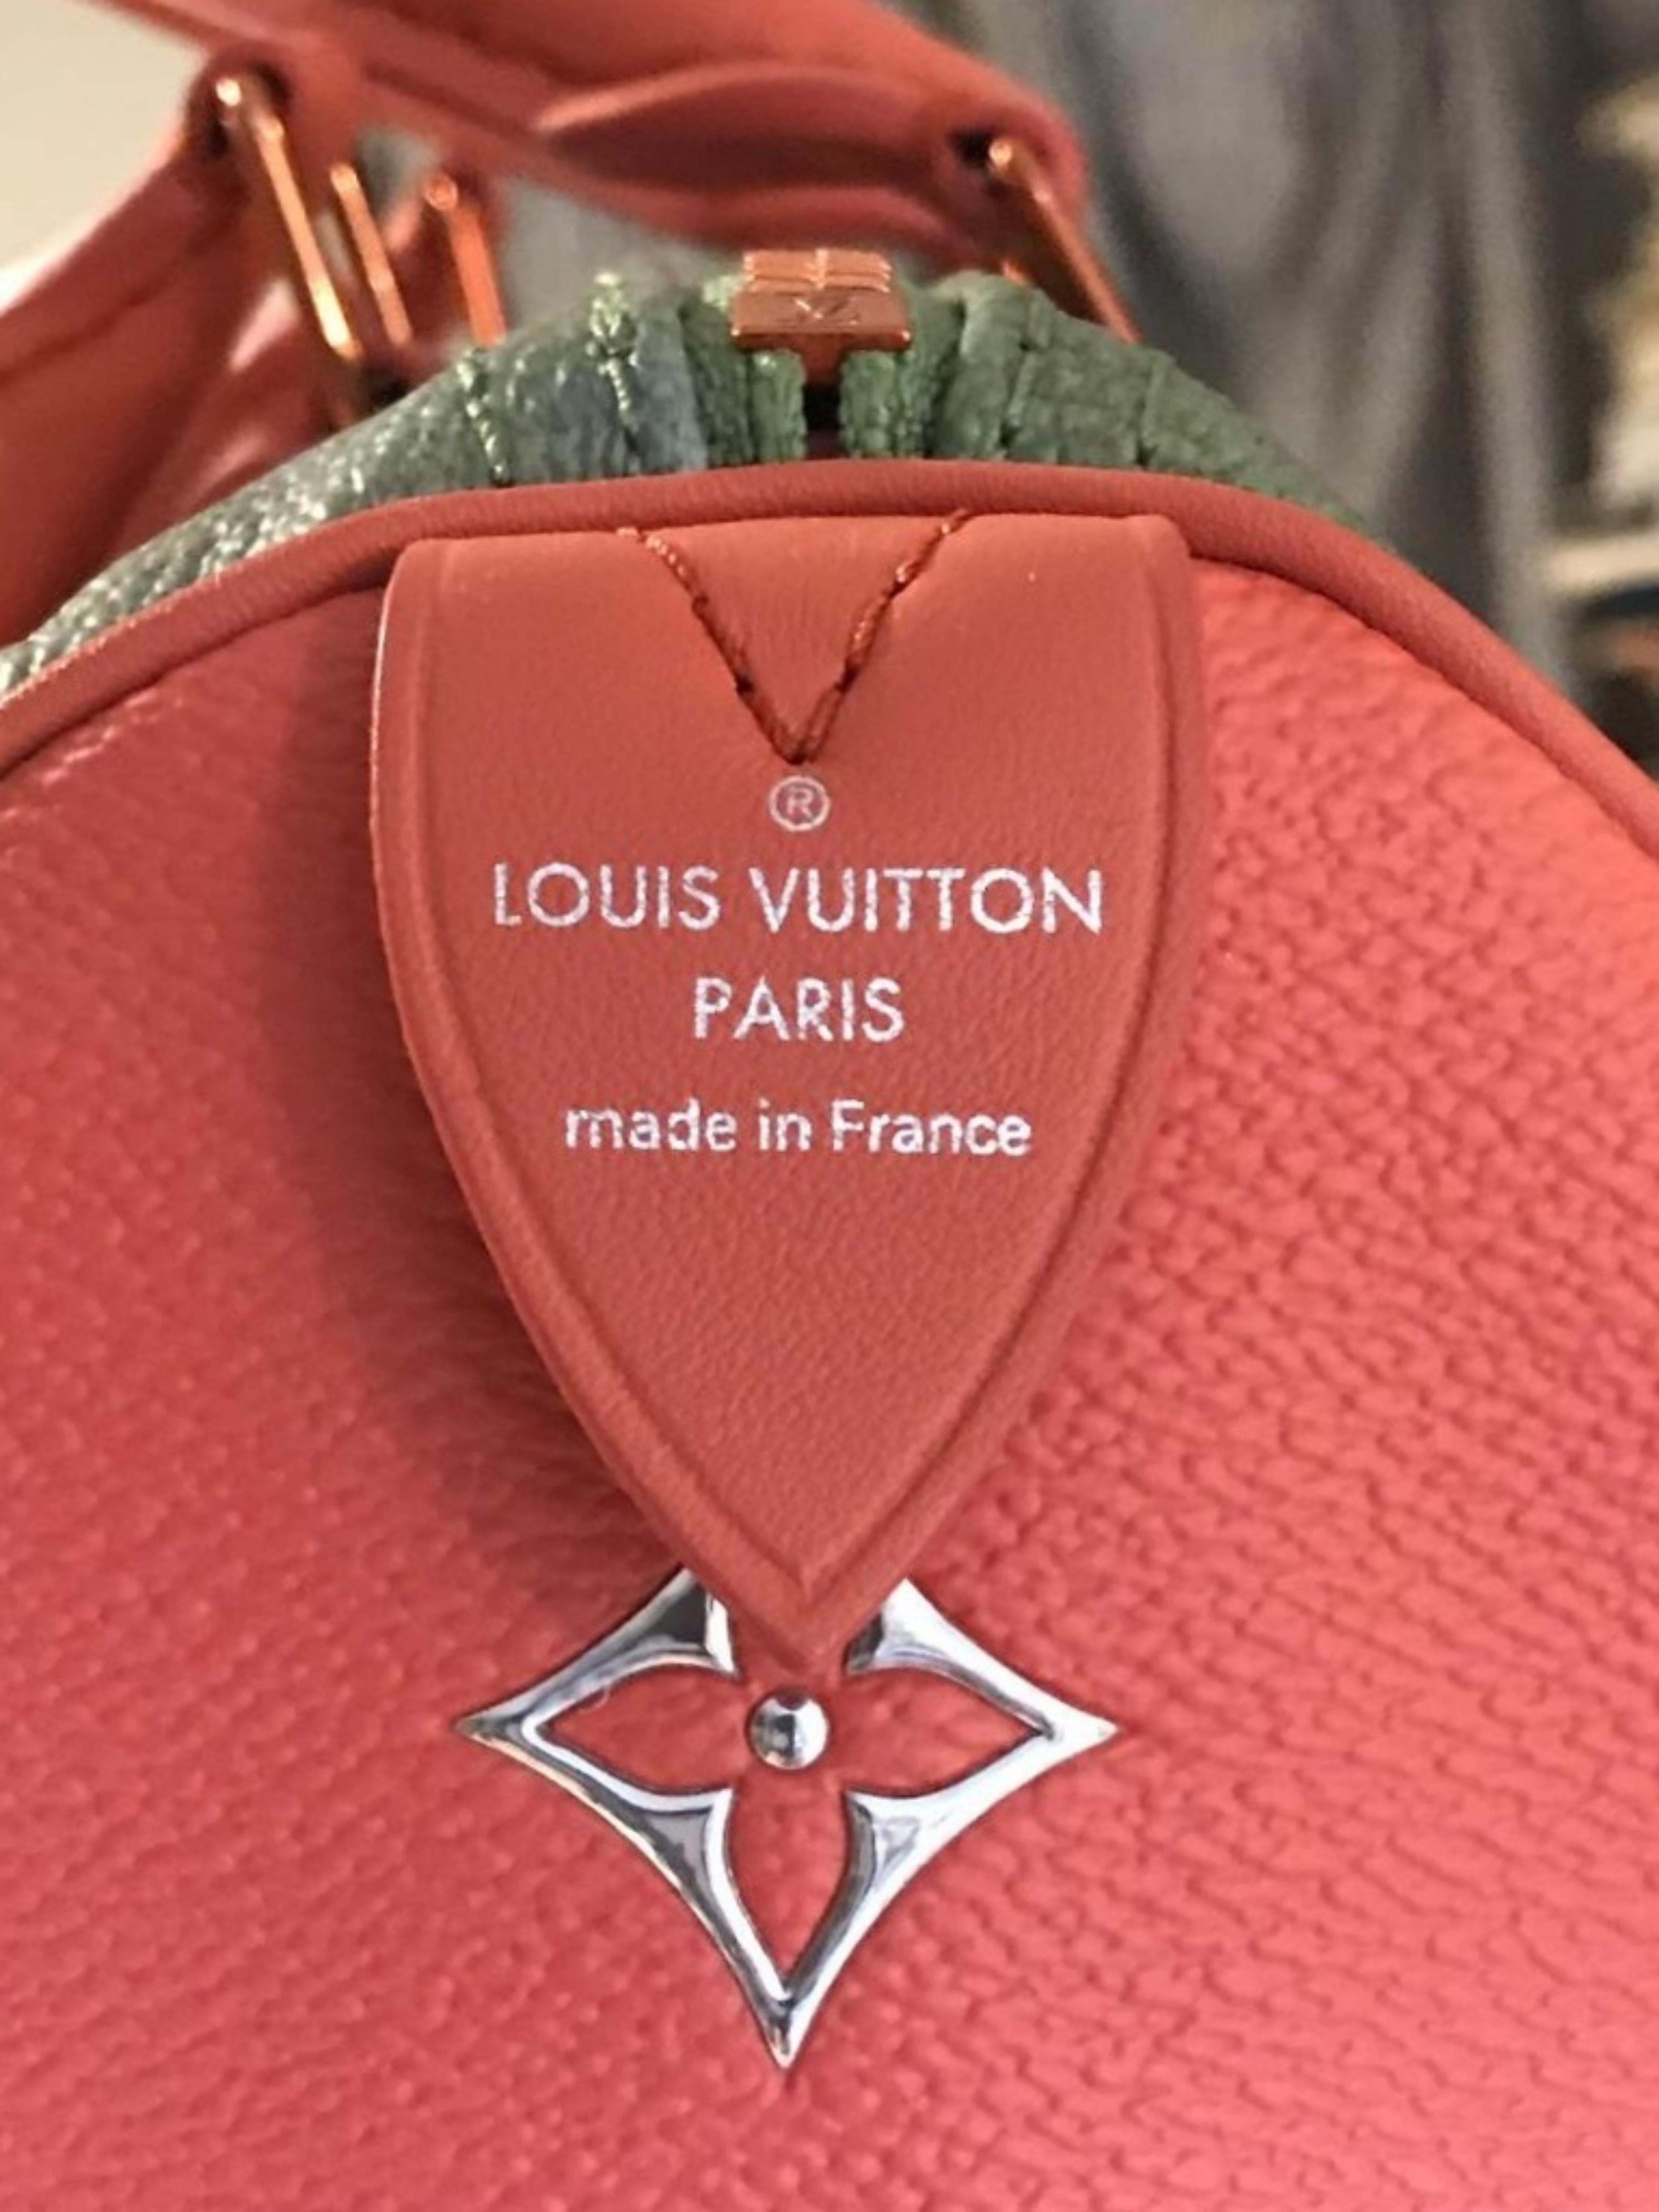 Louis Vuitton Da Vinci bag (uniquely hand signed and dated by Jeff Koons)  For Sale 3